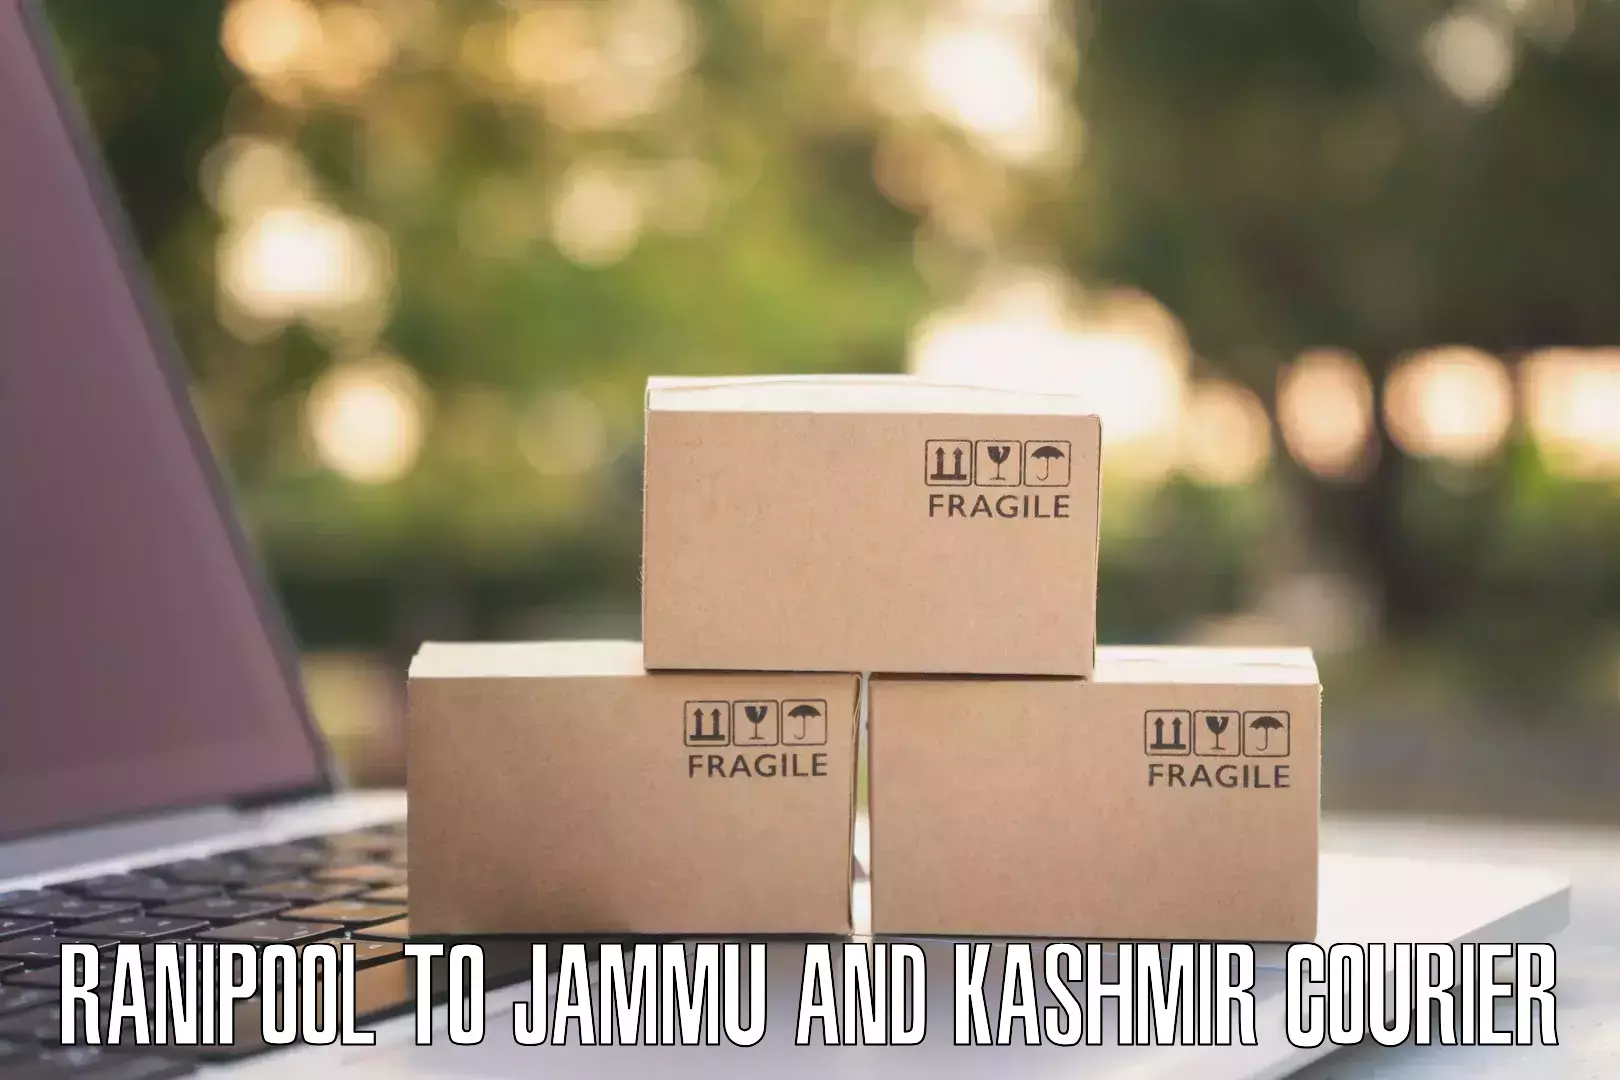 Courier service comparison Ranipool to University of Jammu